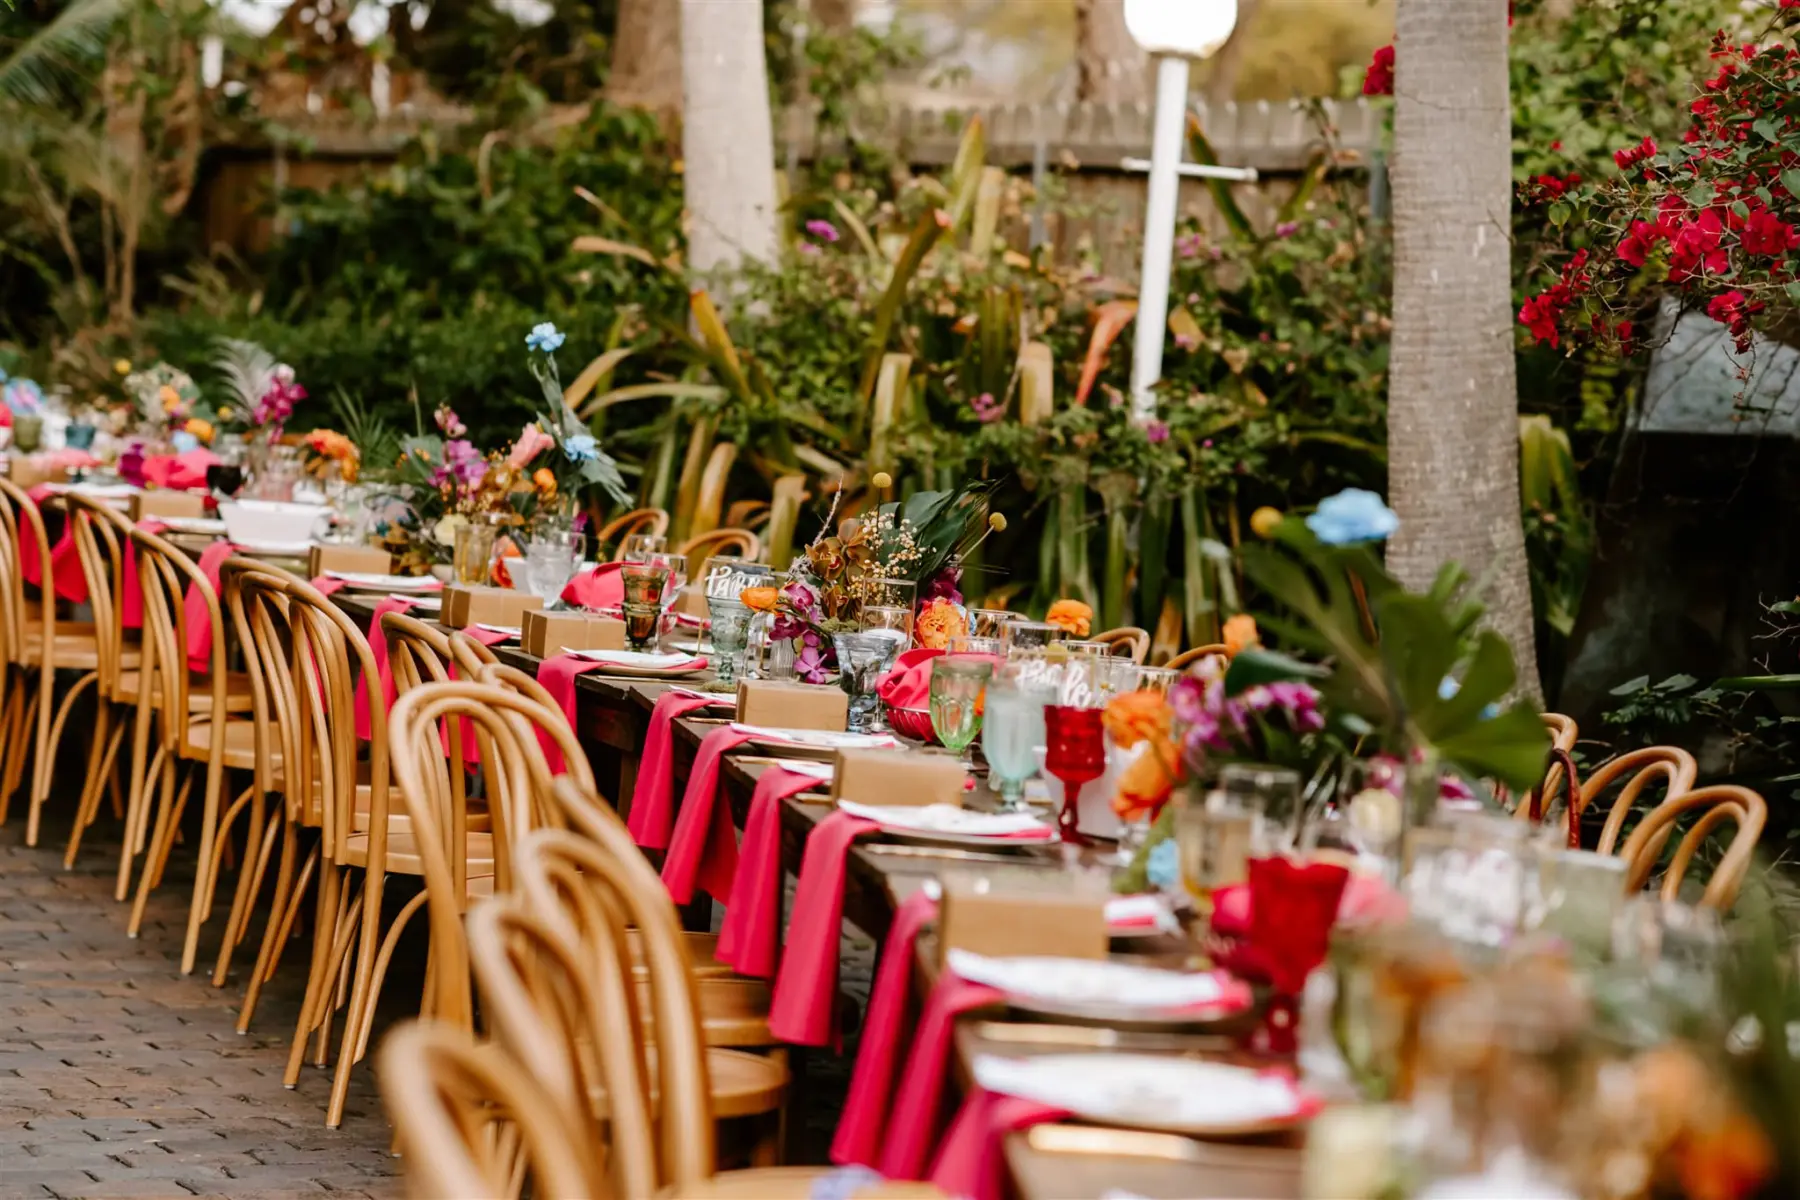 Vibrant Tropical Spring Outdoor Wedding Reception Curved Feasting Table Ideas | Tampa Bay Event Planner Wilder Mind Events